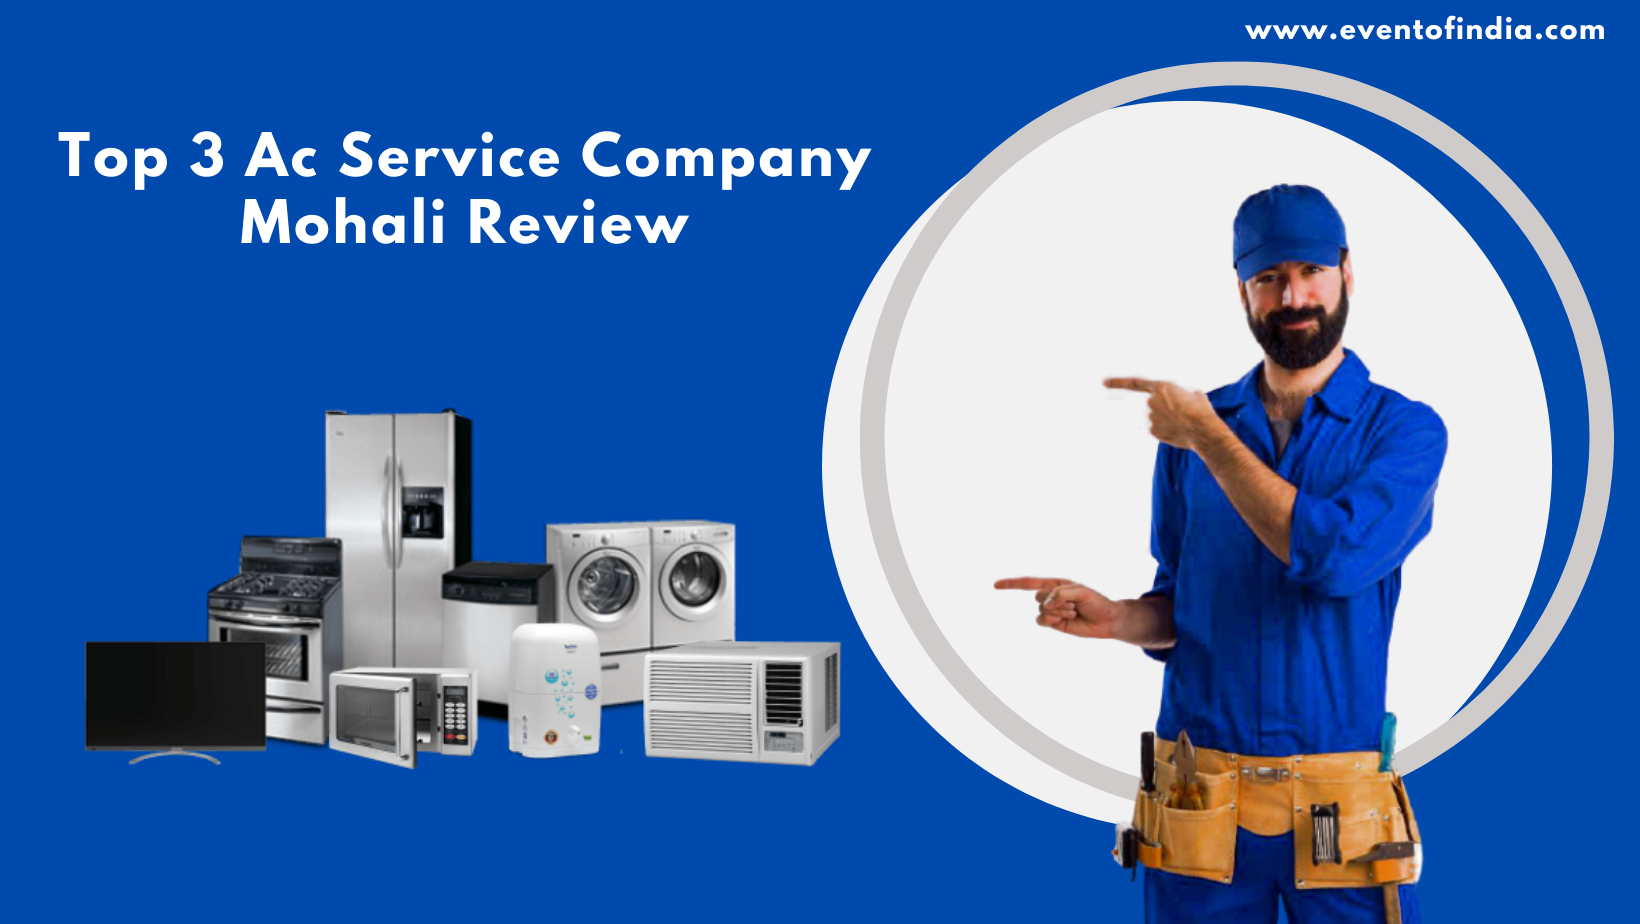 Top 3 Best Ac Service Company in Mohali